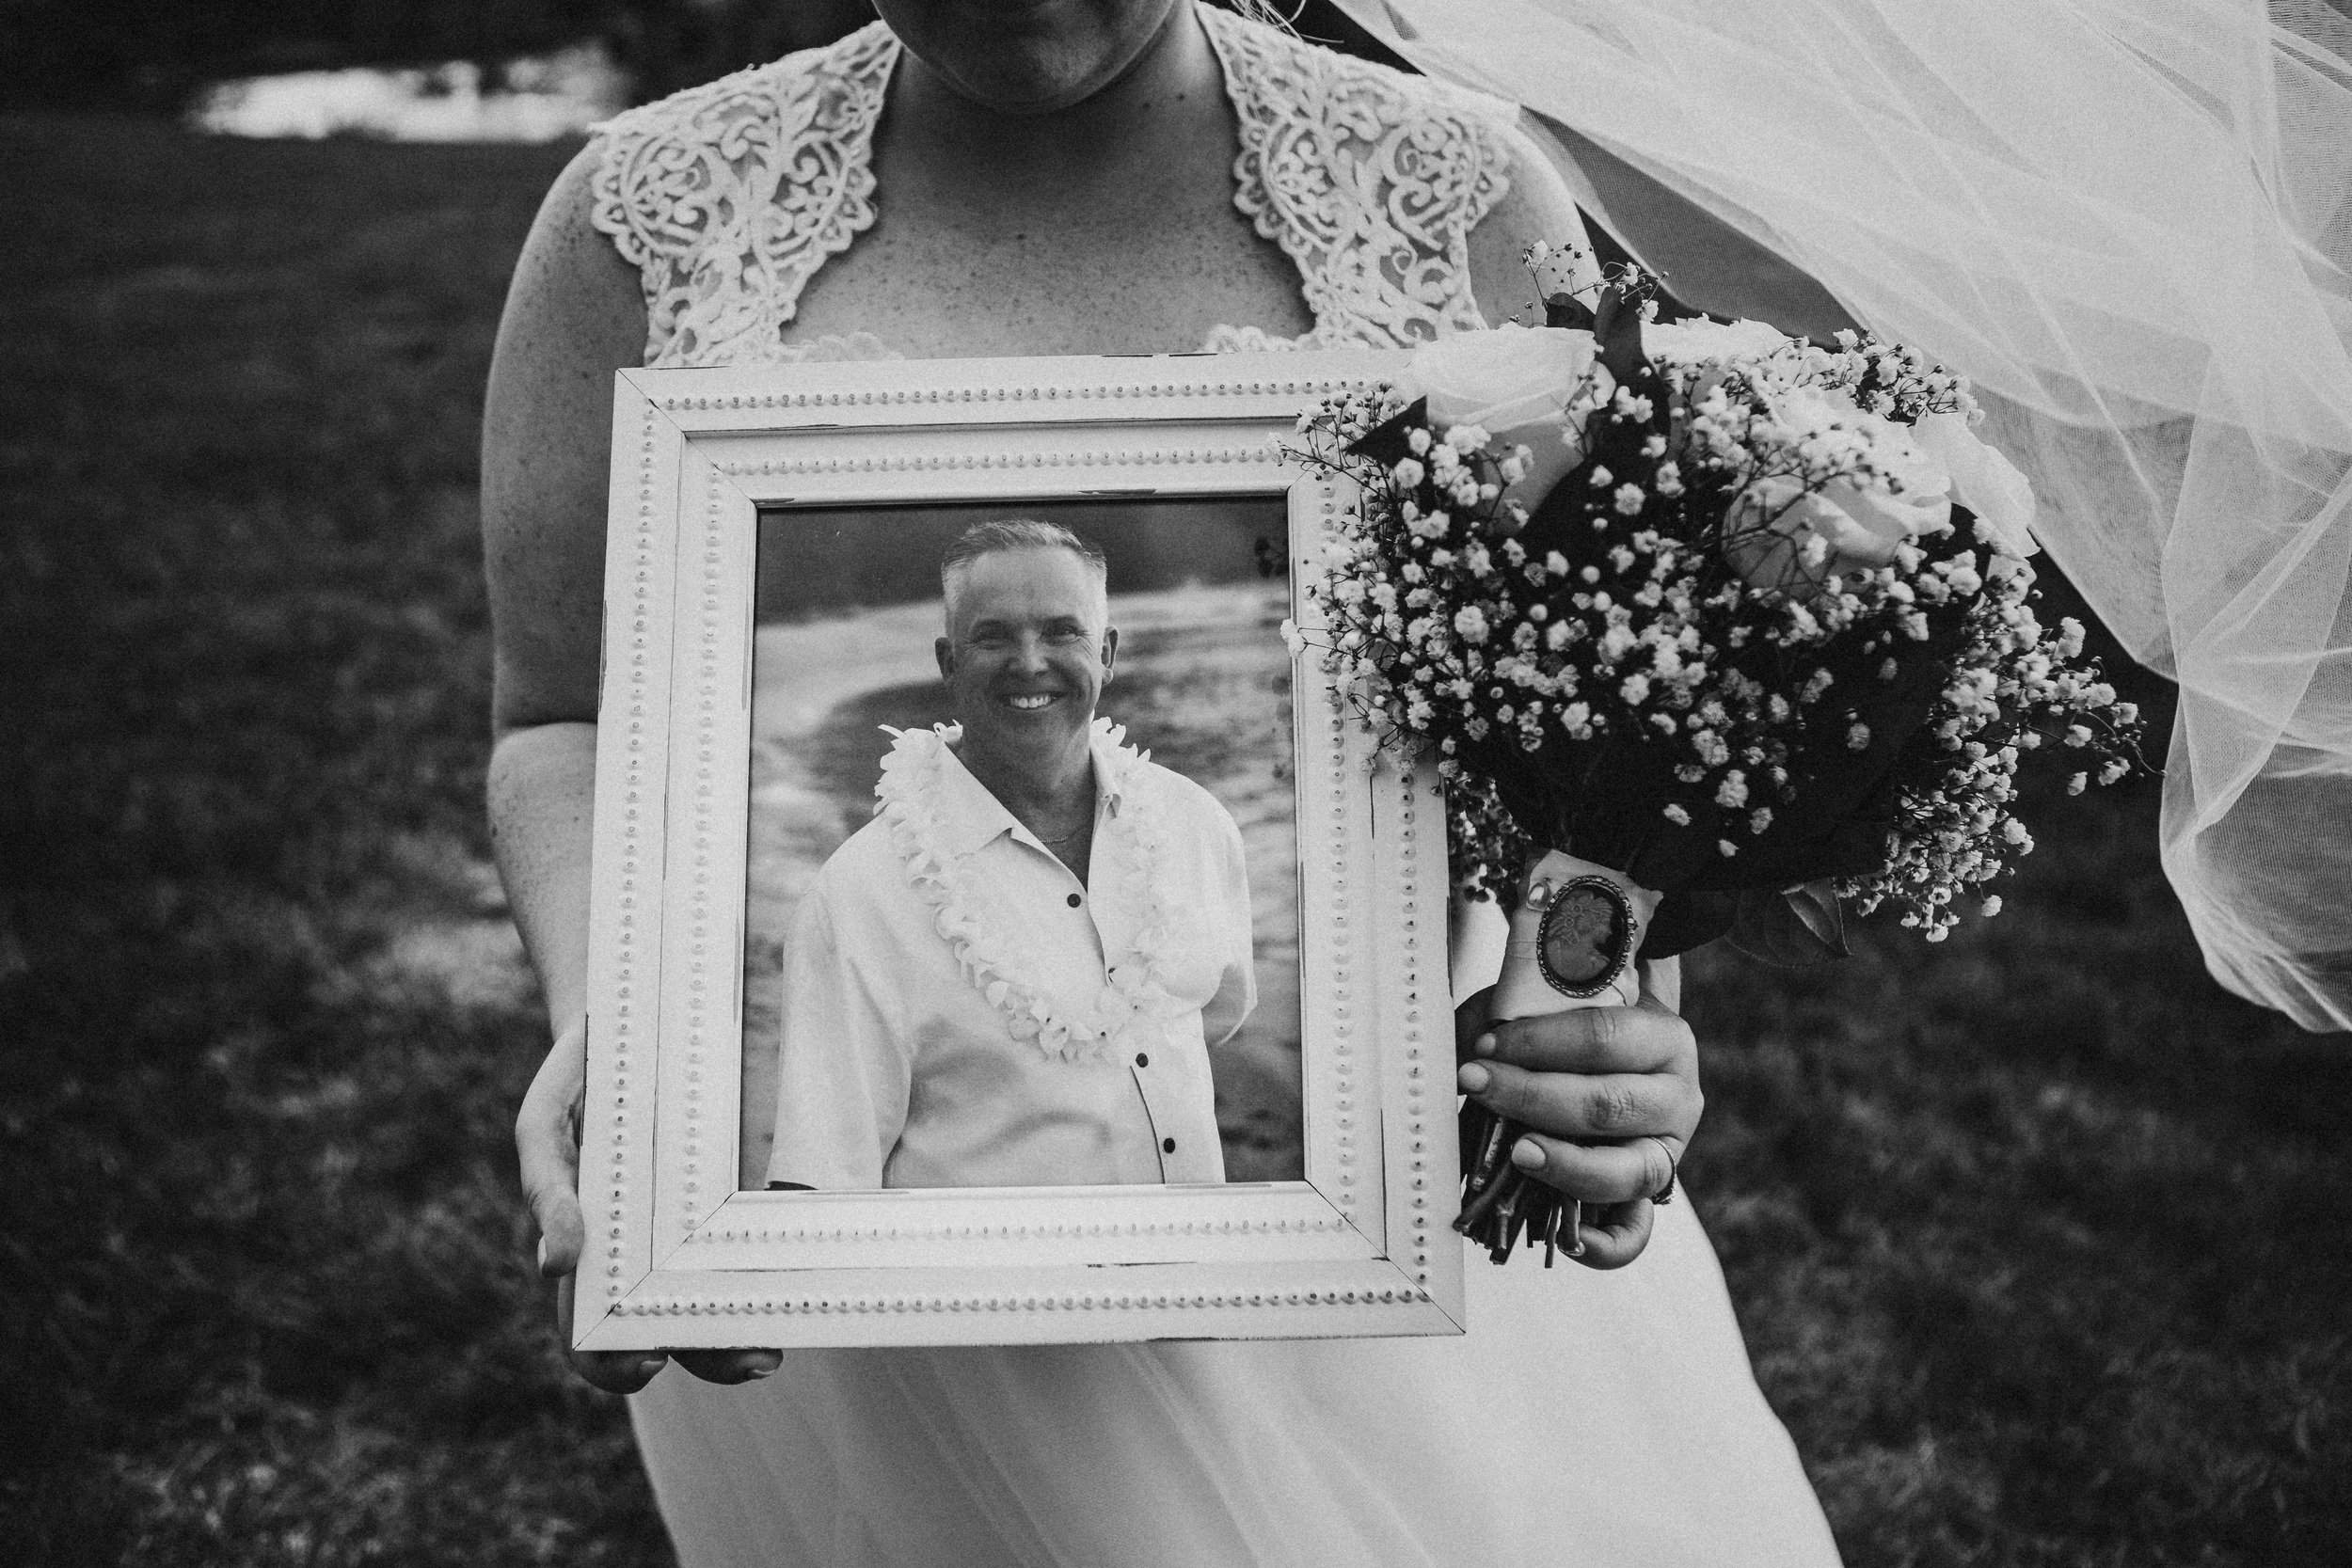  Such a beautiful tribute to someone missed on the brides wedding day #tealawardphotography #texasweddings #amarillophotographer #amarilloweddingphotographer #emotionalphotography #intimateweddingphotography #weddingday #weddingphotos #texasphotographer #inspiredwedding #intimatewedding #weddingformals #bigday #portraits 